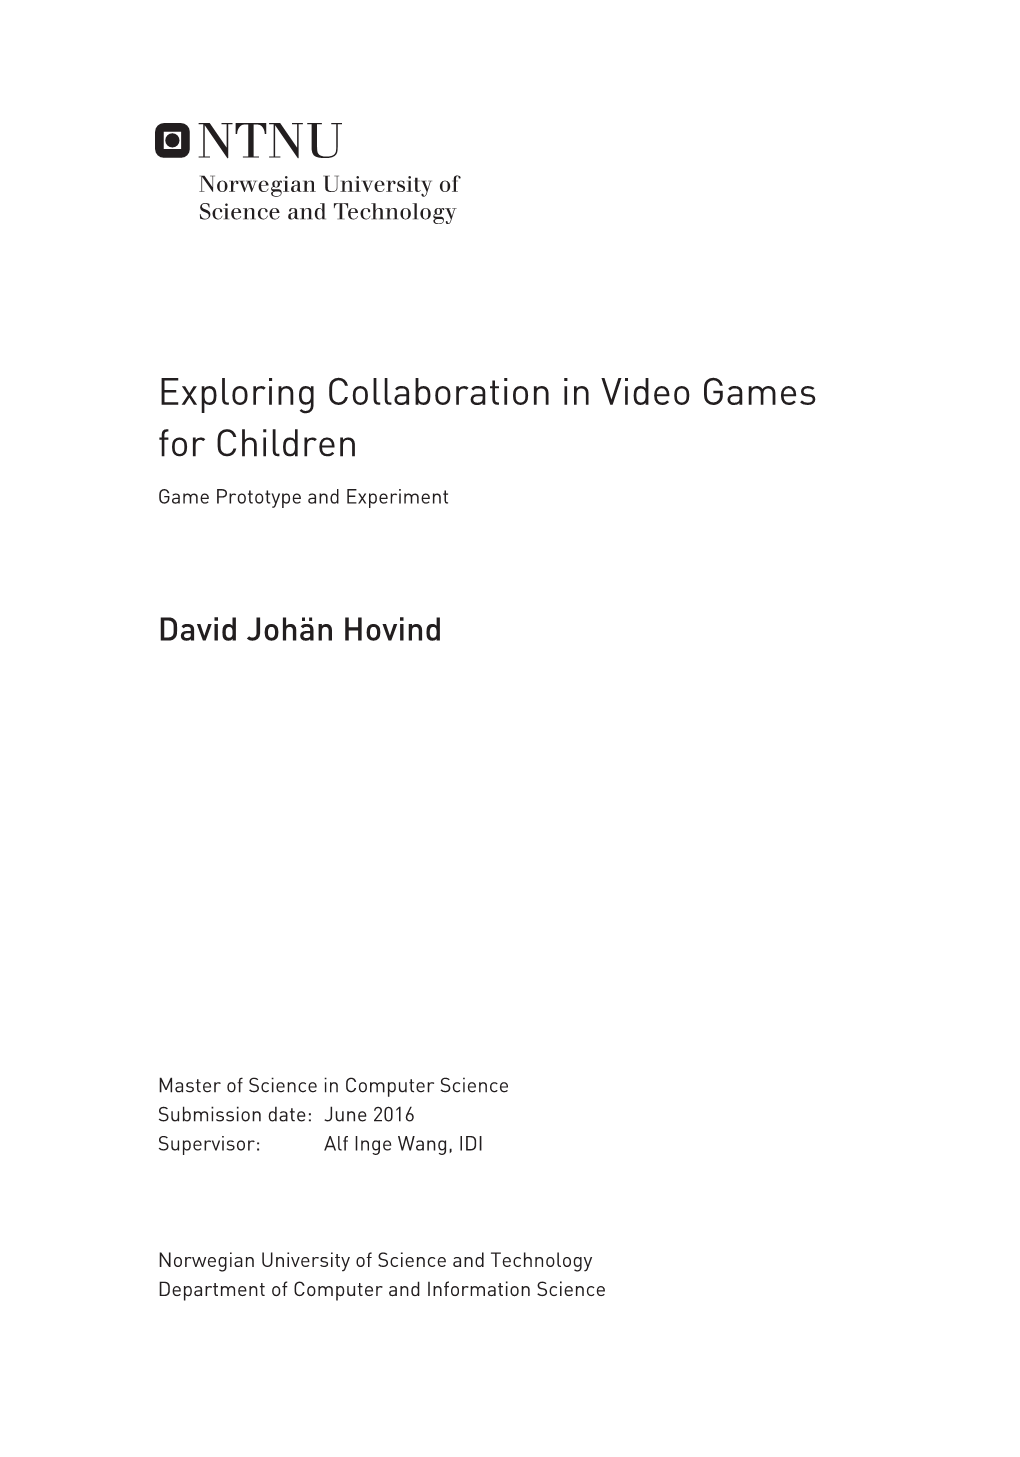 Exploring Collaboration in Video Games for Children